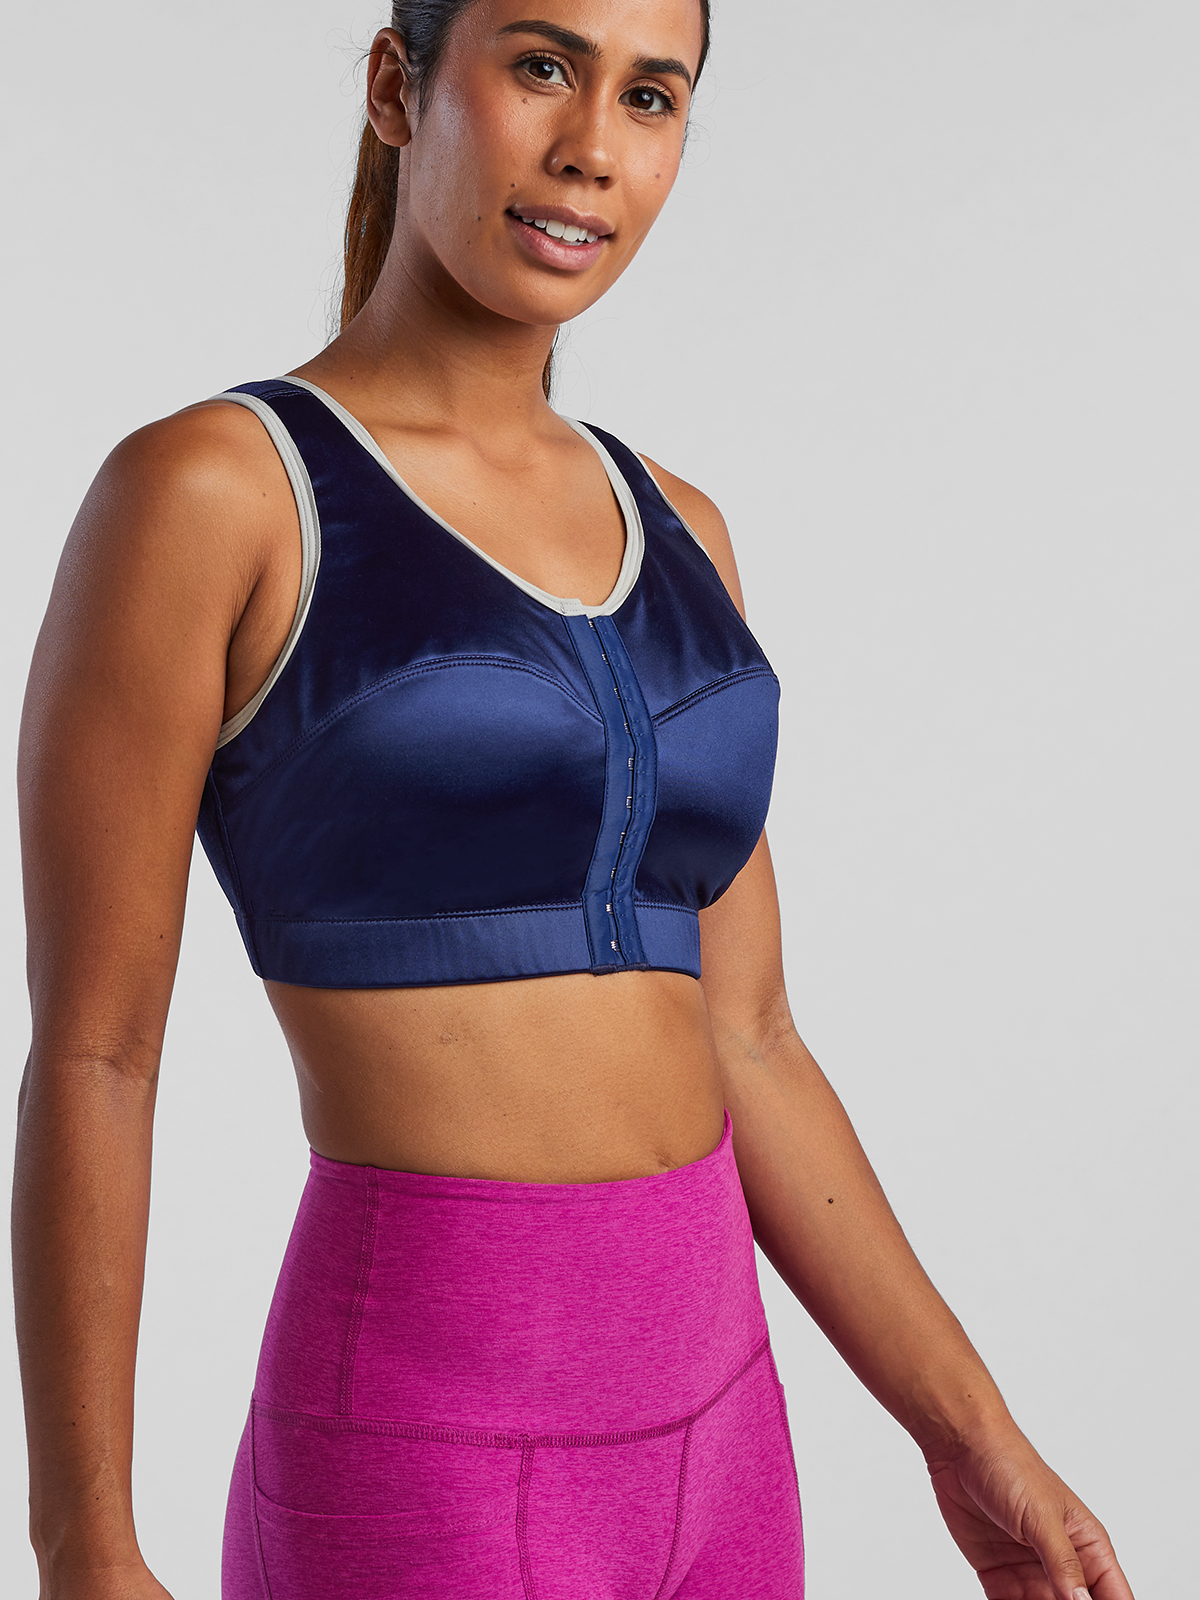 High Impact Motion Control Zip Front Sports Bra For Workout